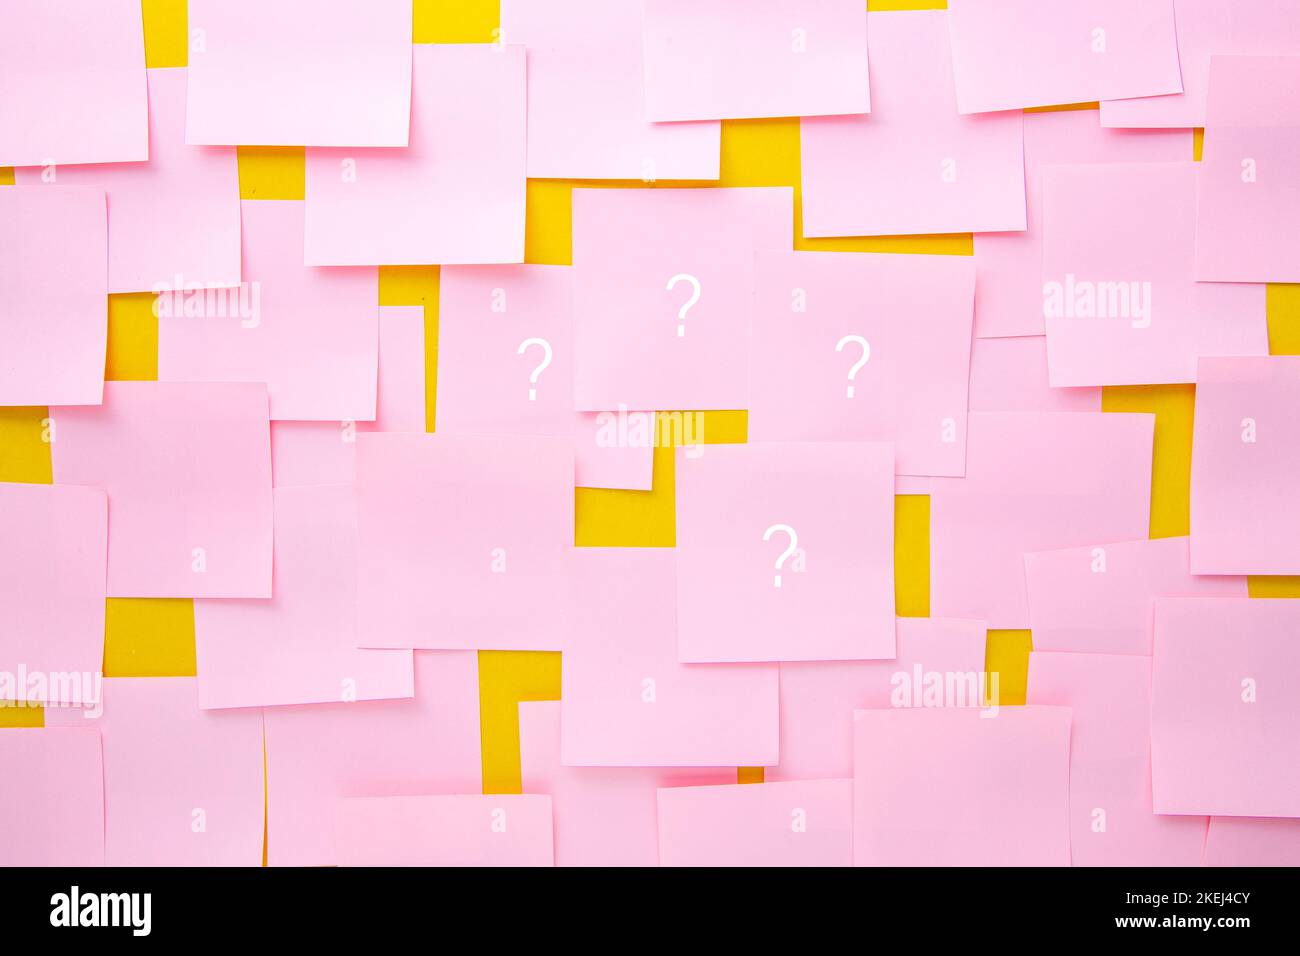 Uncertainty or doubt concept. Sticky notes with question marks. Stock Photo